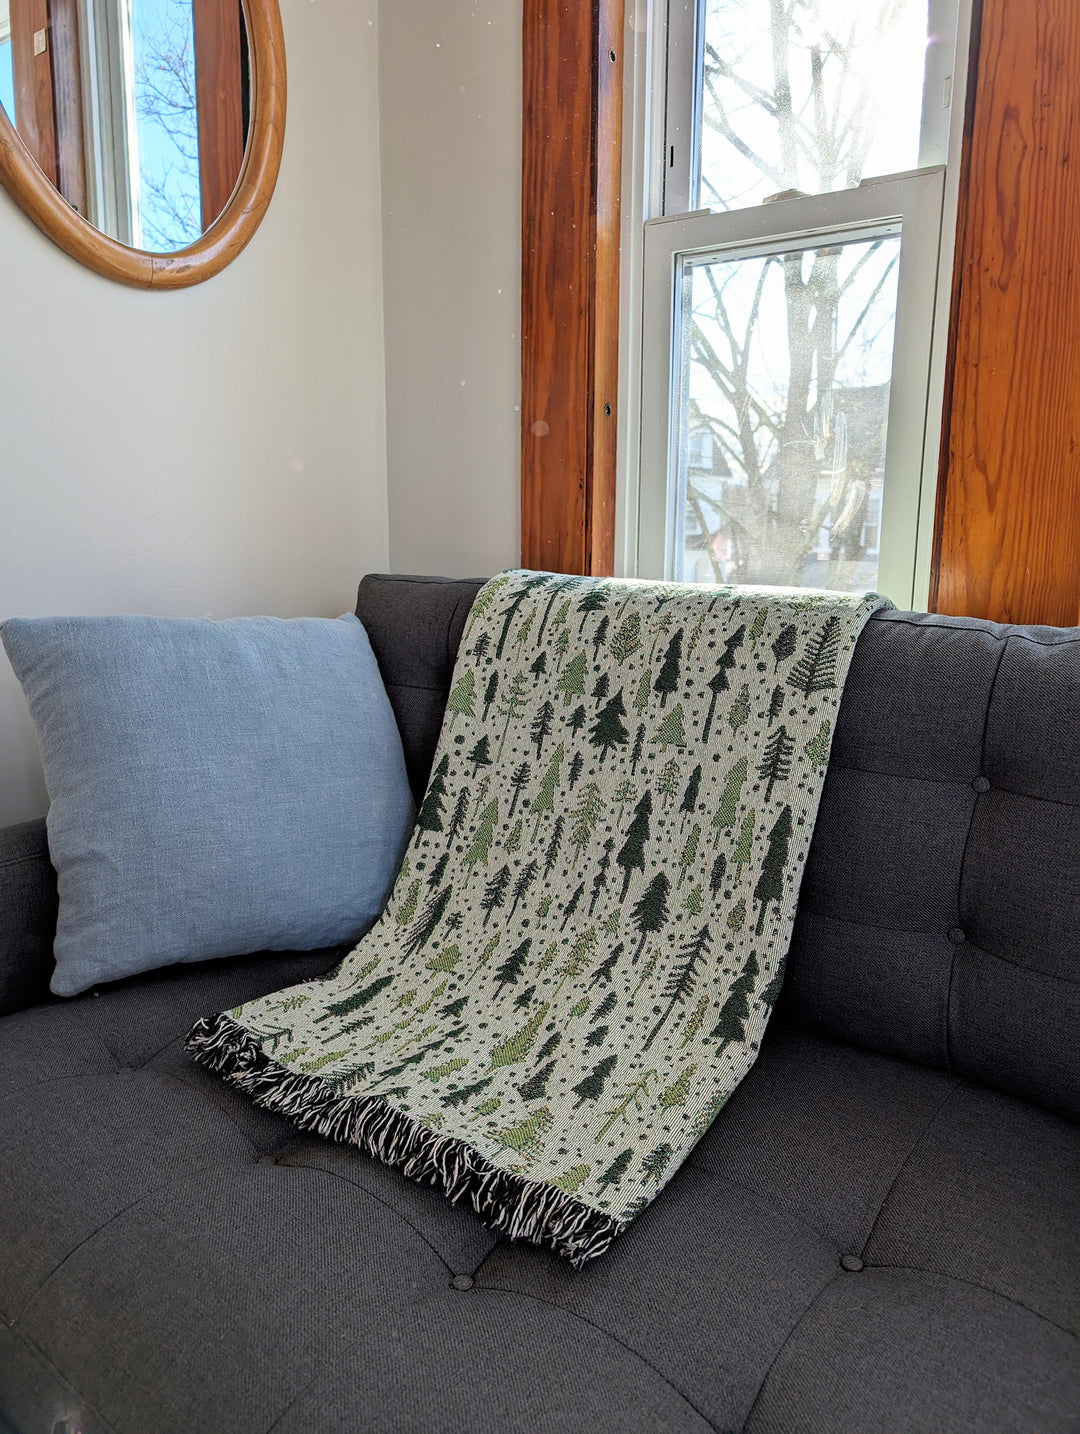 Pine Trees Woven Blanket by Brainstorm - Limited Edition of 1